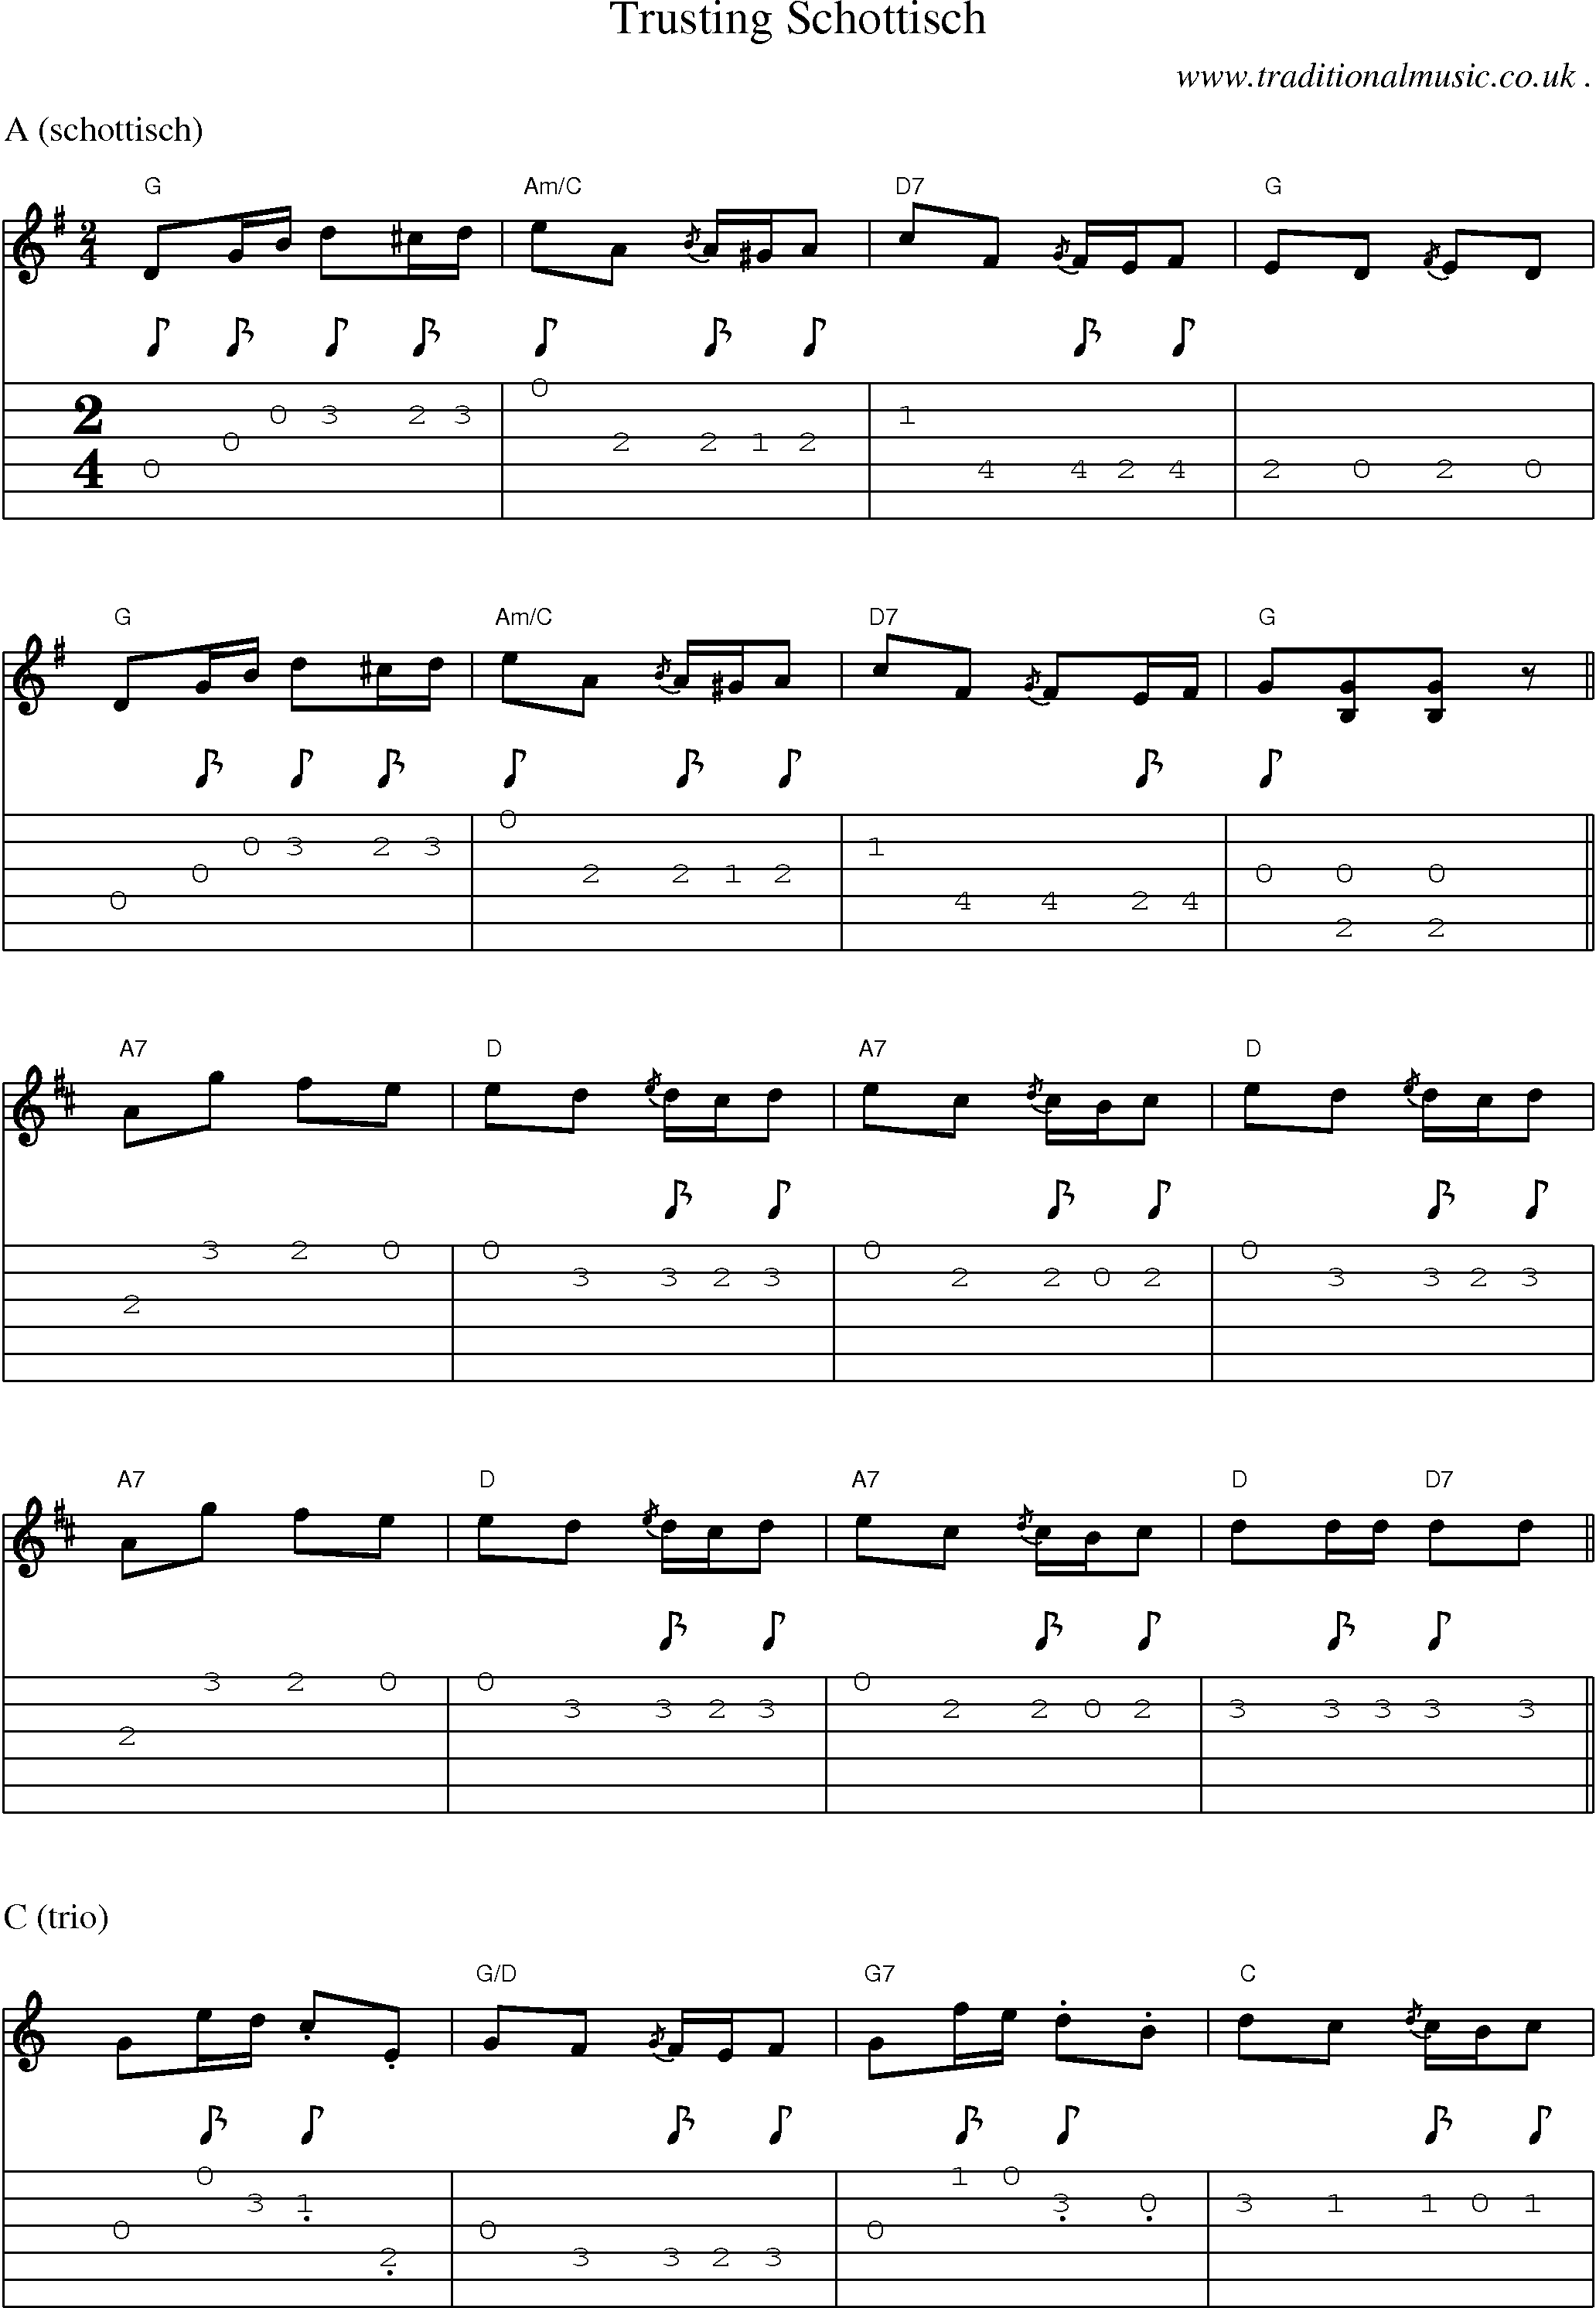 Sheet-music  score, Chords and Guitar Tabs for Trusting Schottisch